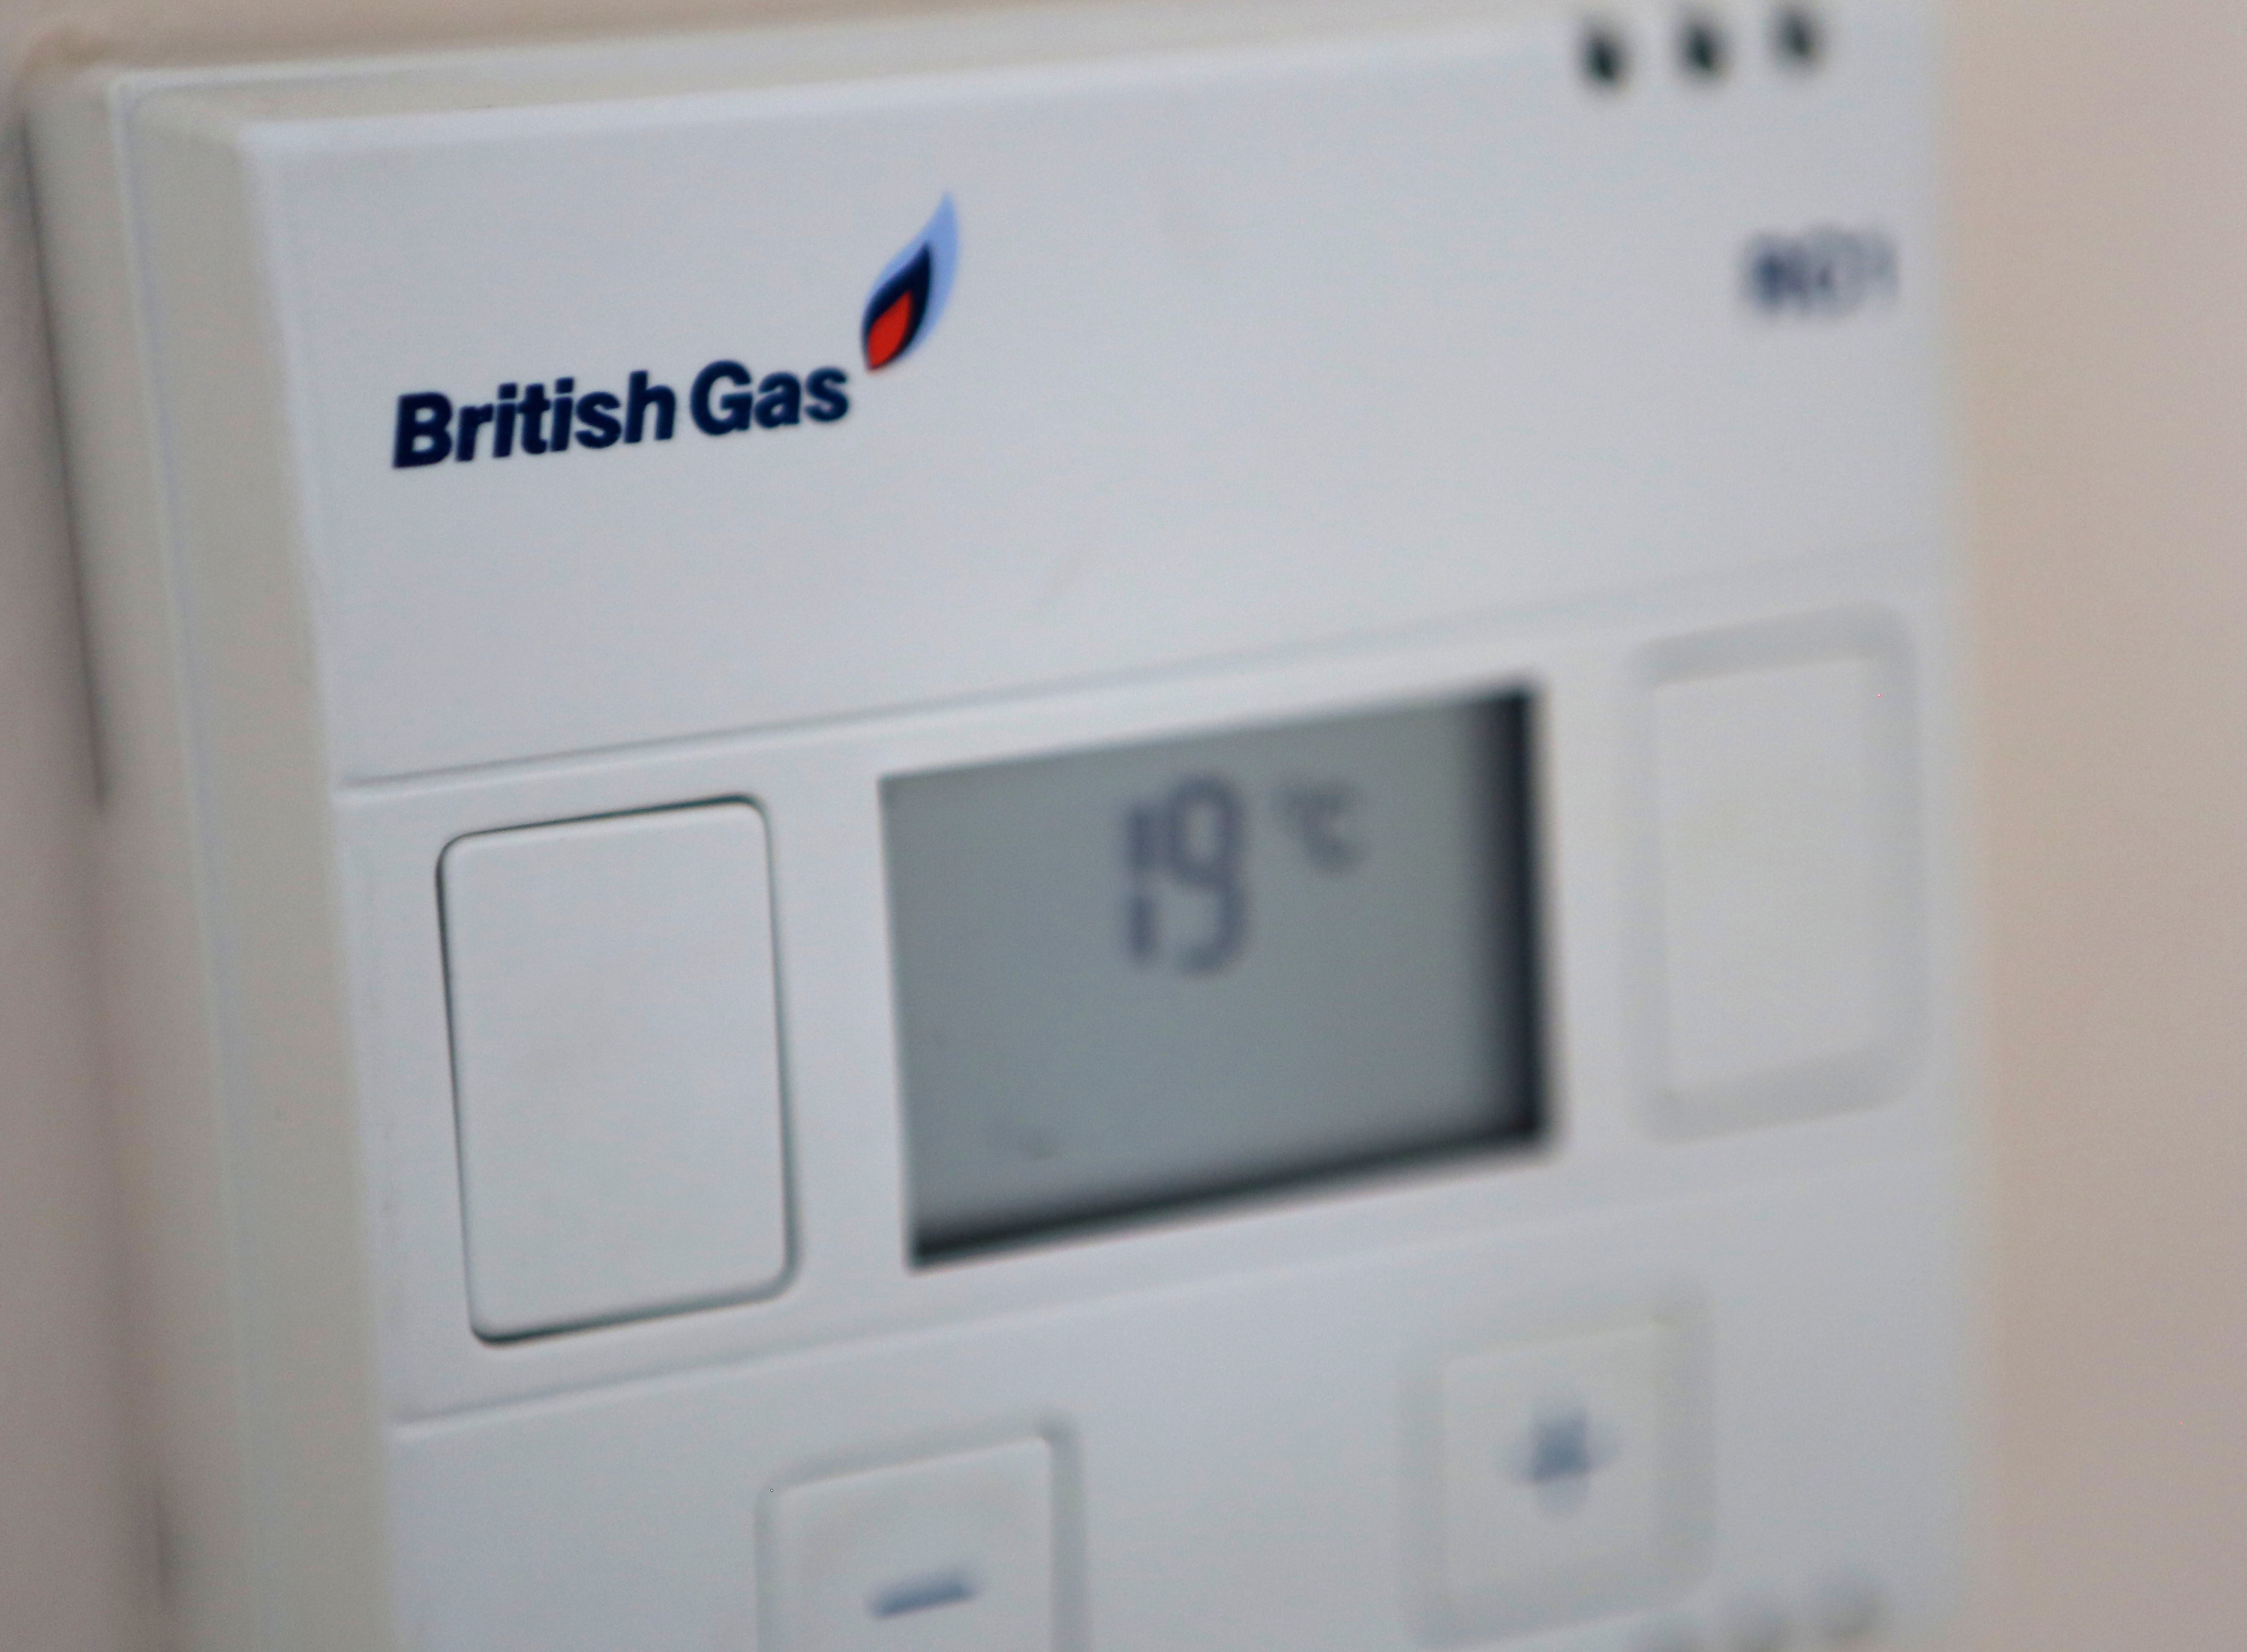 Energy bills are set to soar in April when the price cap is updated (Philip Toscano/PA)